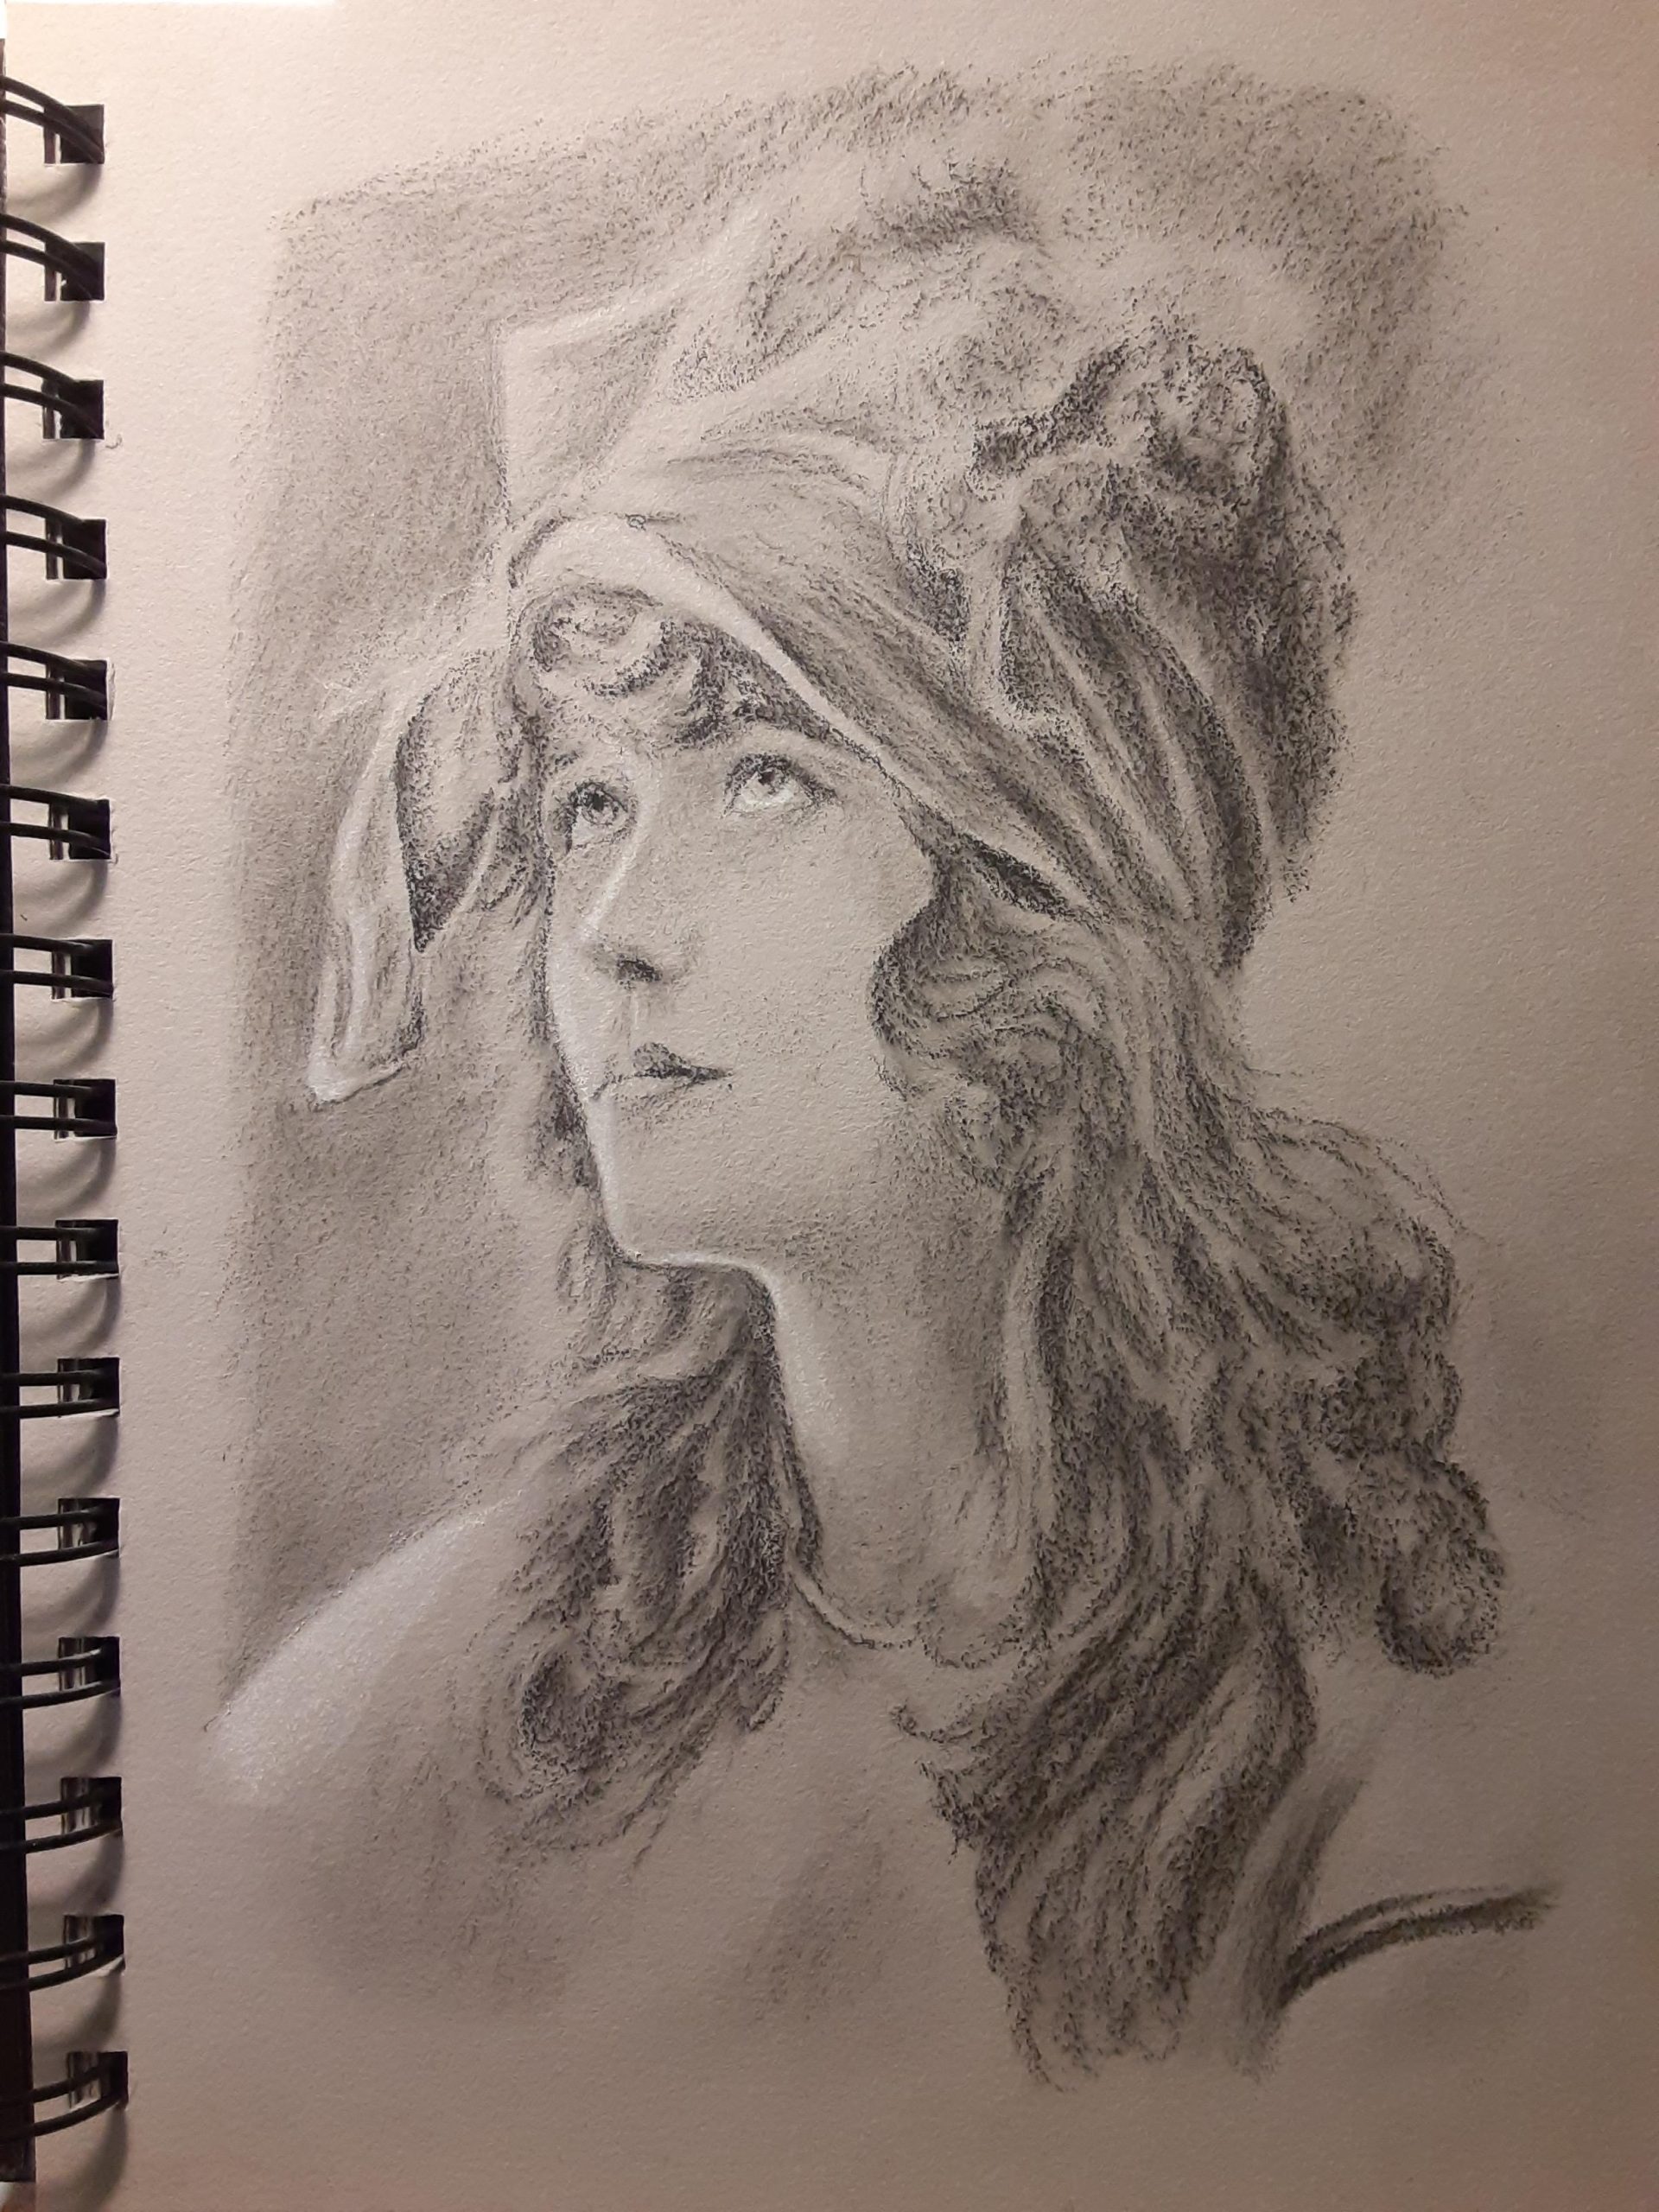 Charcoal sketch of a girl  5 x 7 in